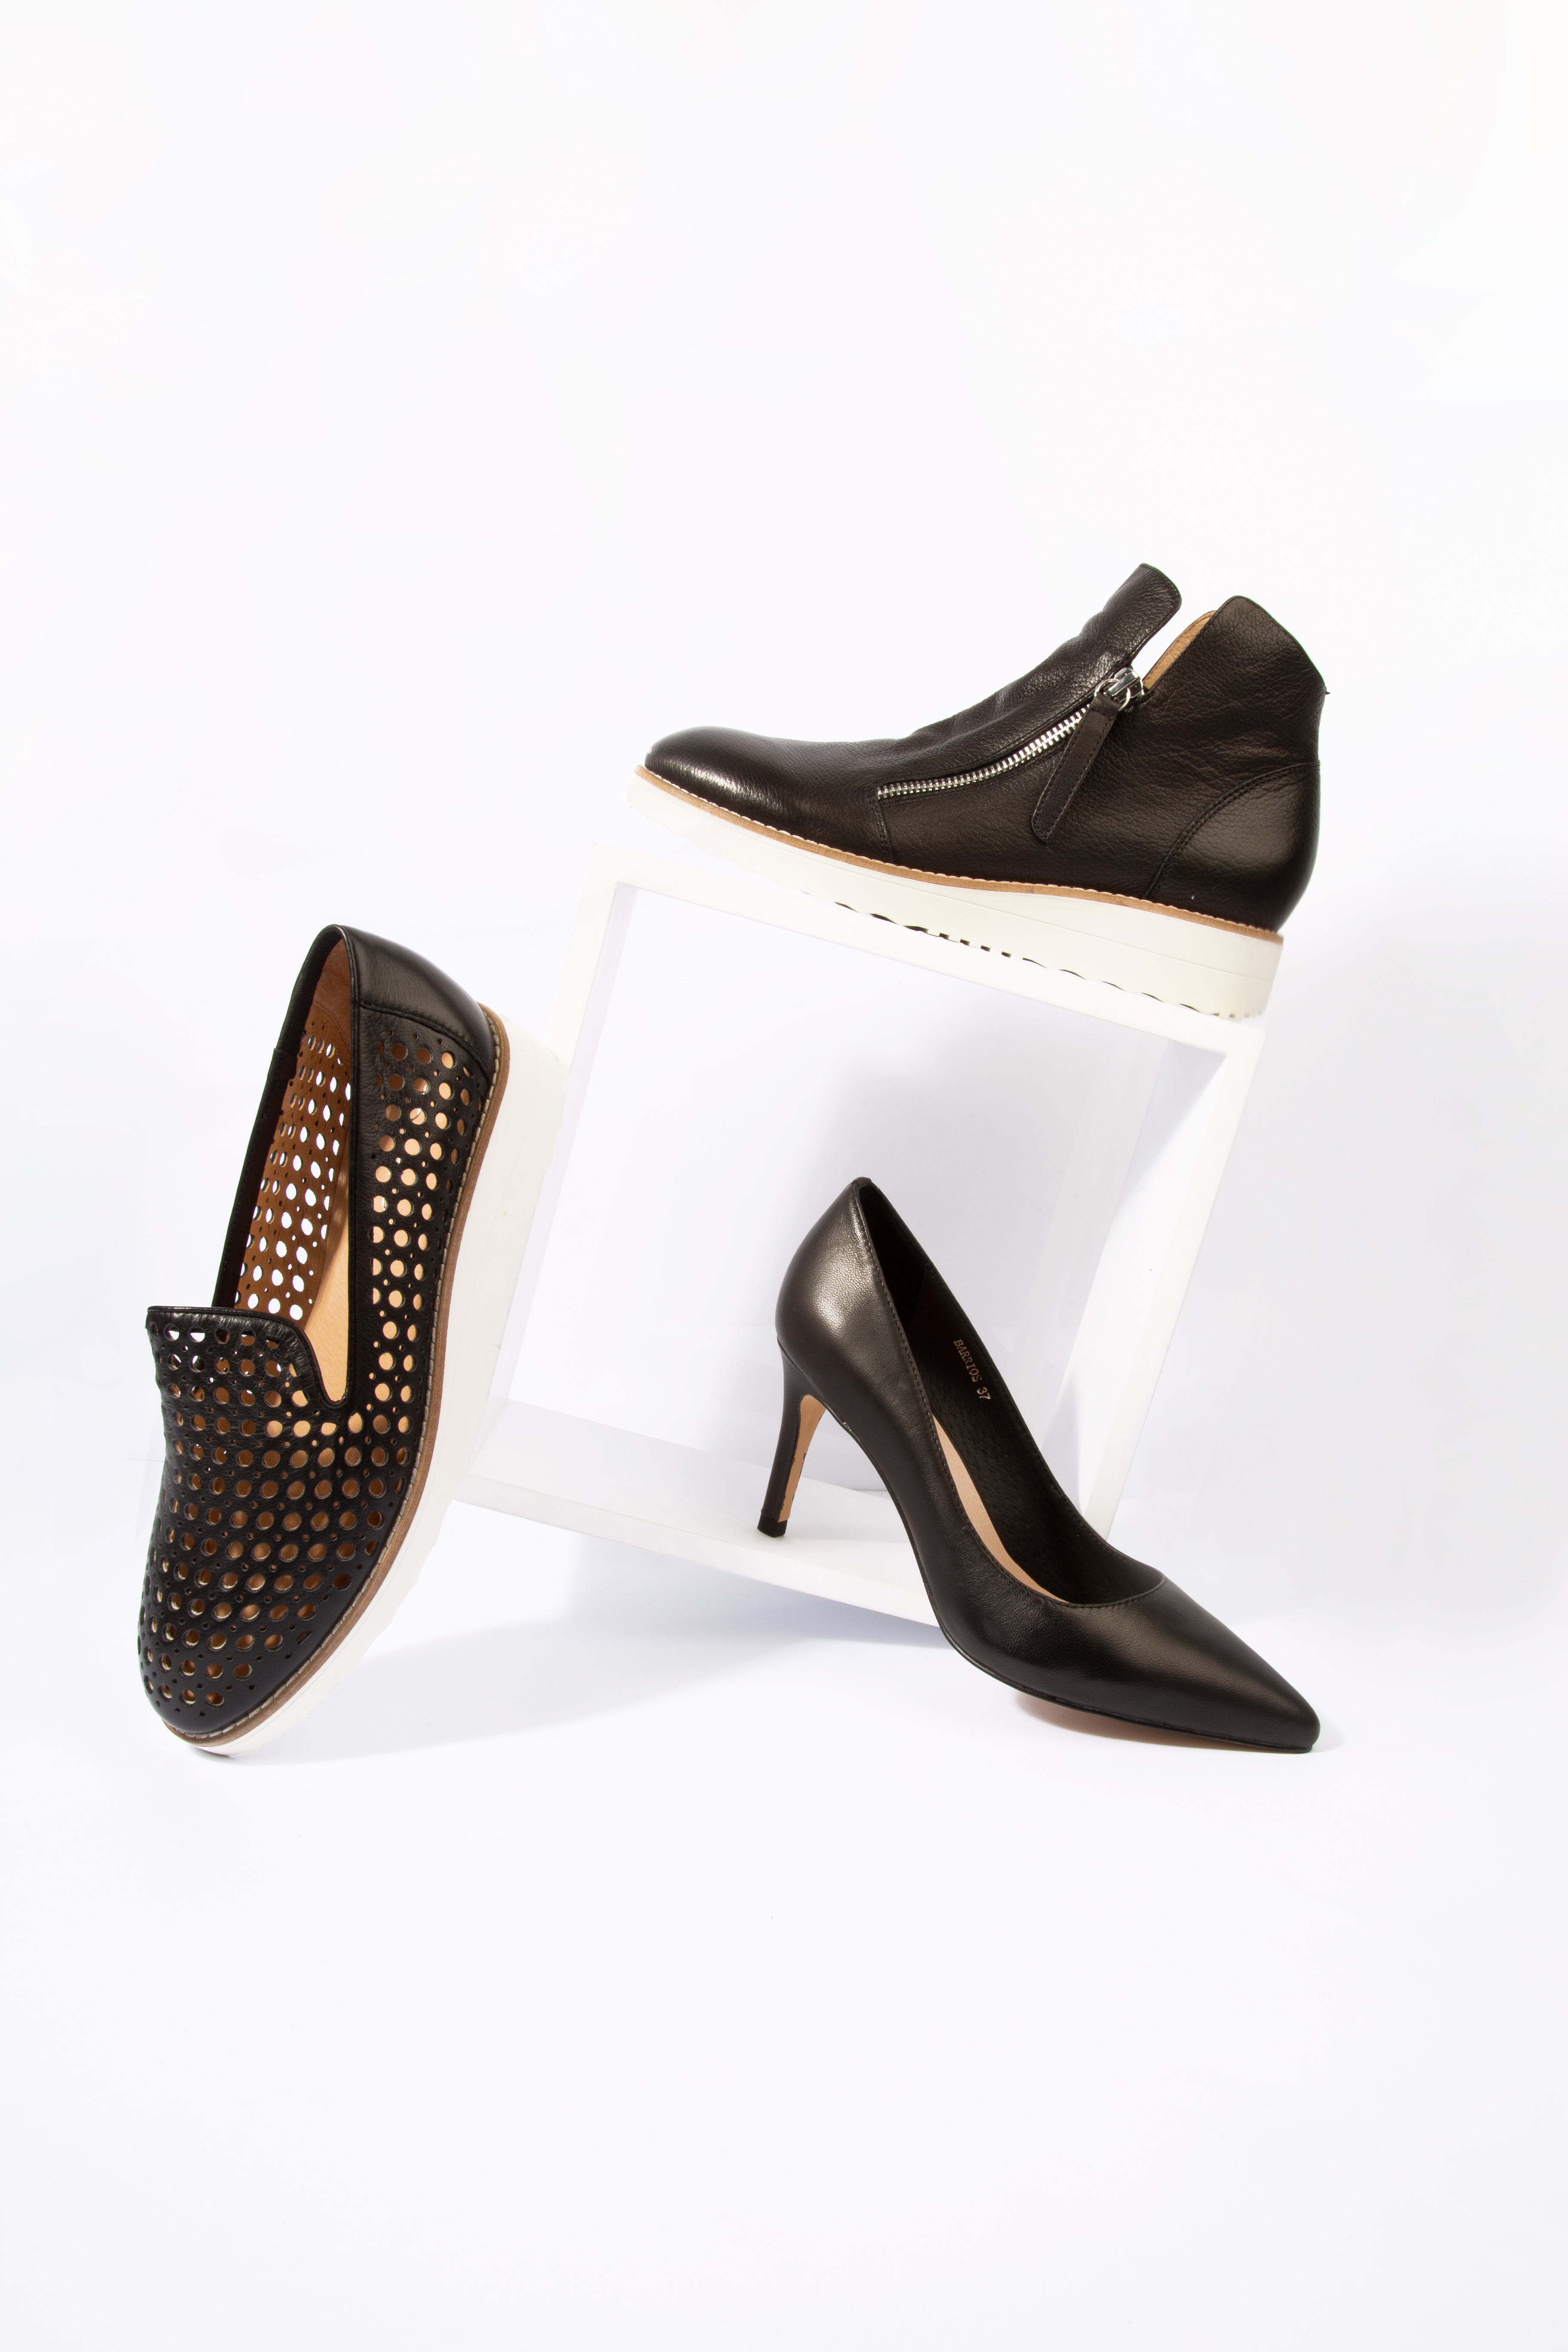 Top End Shoes specialises in Heels 